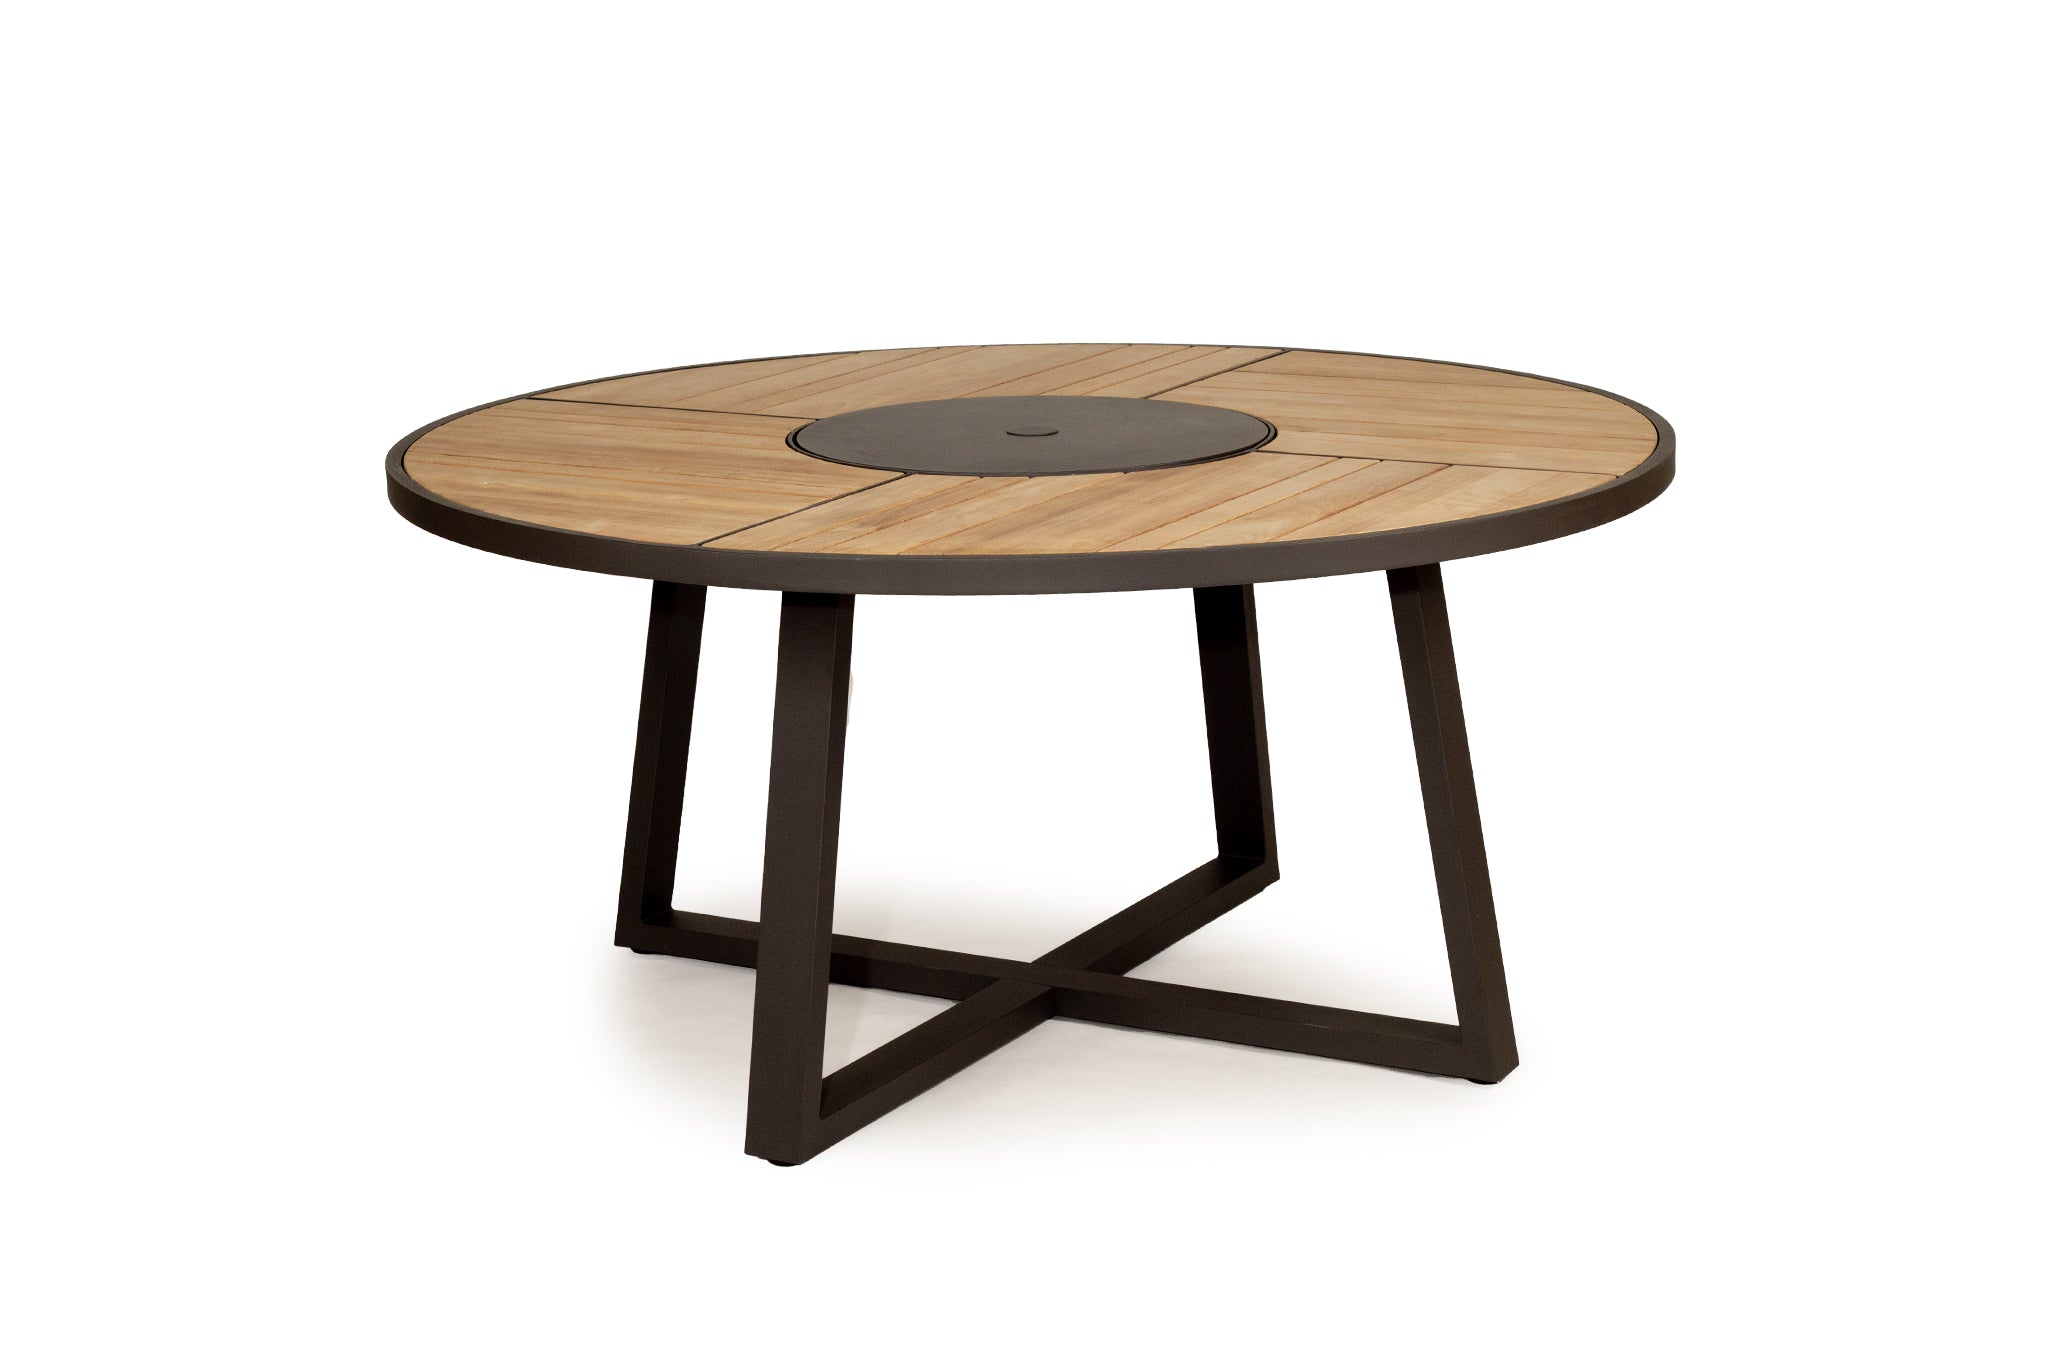 Fraser Outdoor Round Dining Table – 1.6m – Asteroid Black (Charcoal) Powder Coated Legs